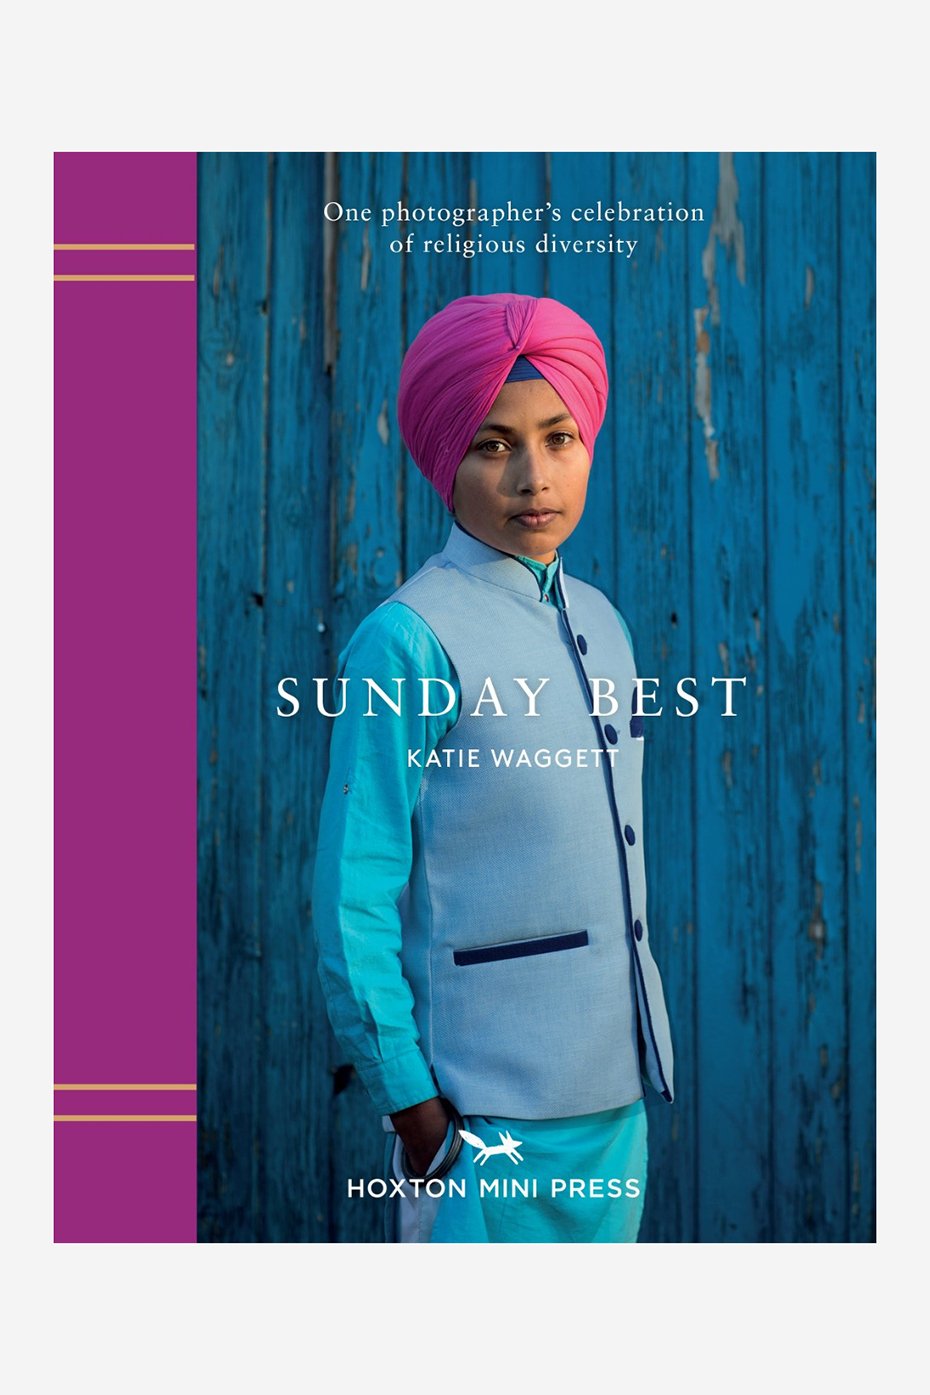 Turnaround Books Sunday Best By Katie Waggett For Hoxton Mini Press Book